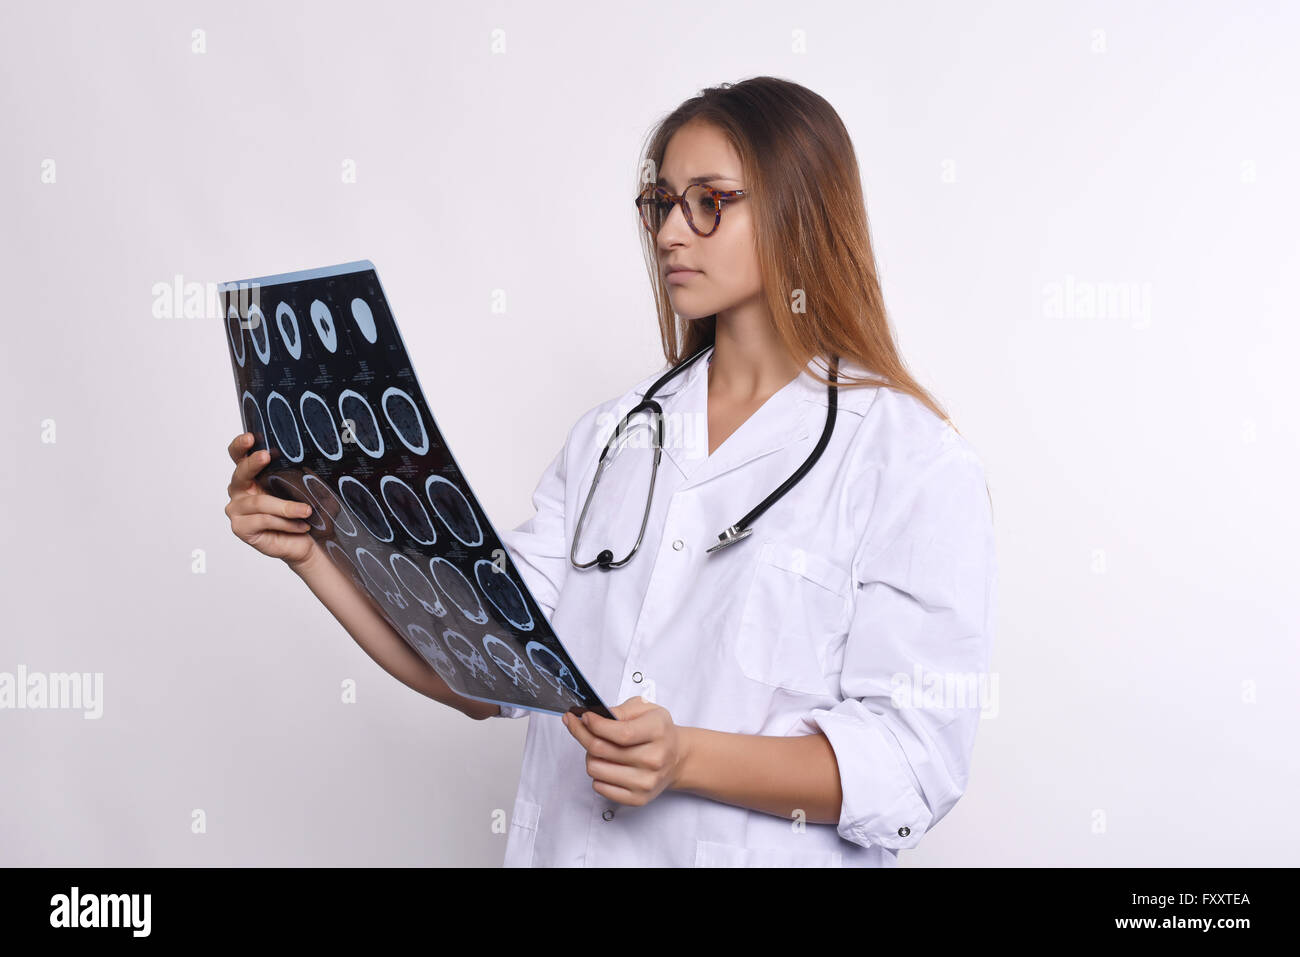 Portrait of young woman doctor with stethoscope and MRI scans. Isolated white background Stock Photo